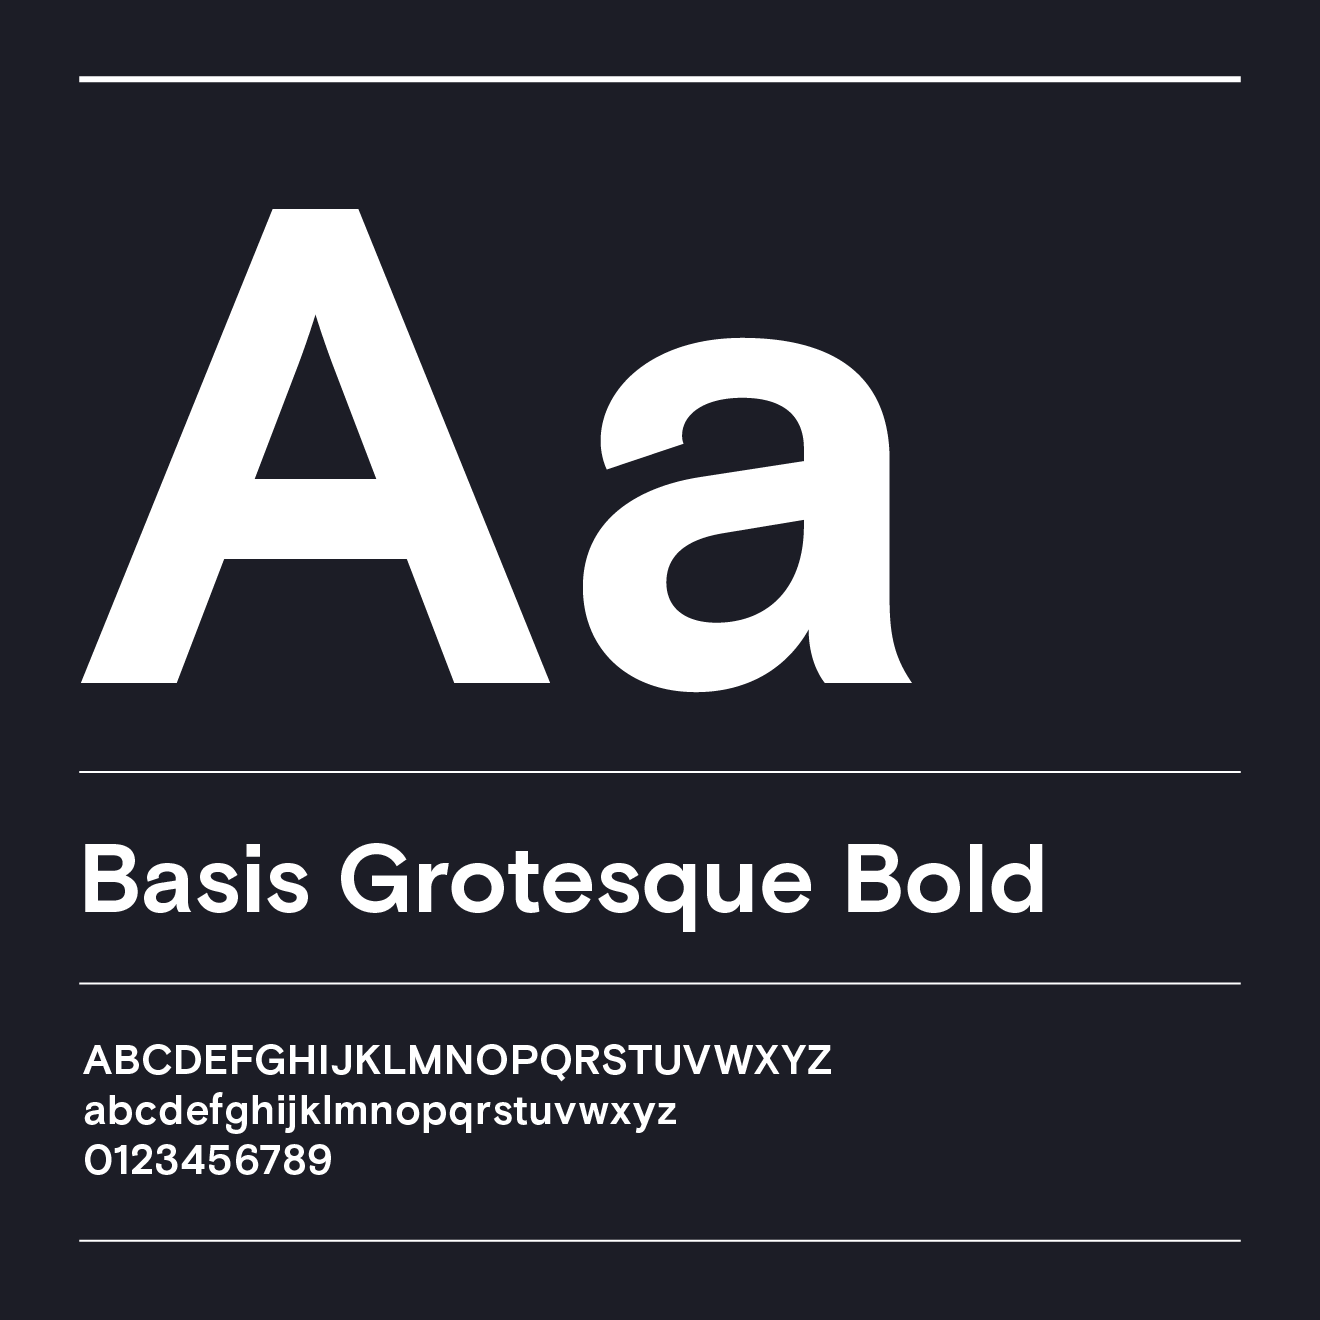 White text of the letter A over a black background in Basis Grotesque Bold font